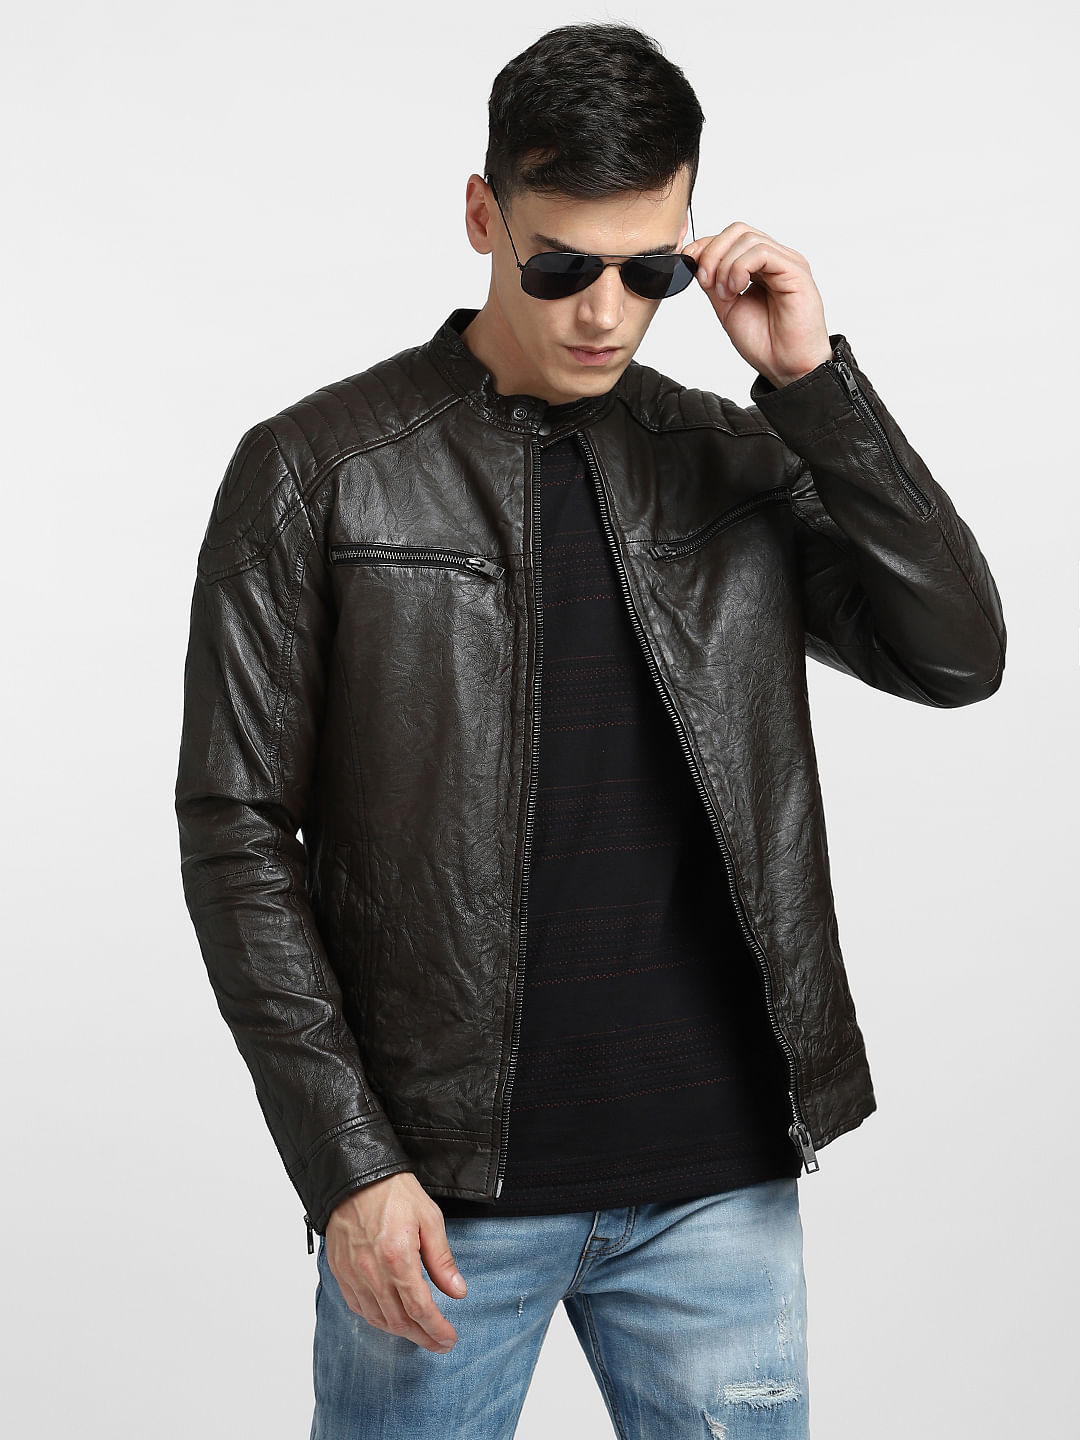 Best Offers on Mens leather jackets upto 20-71% off - Limited period sale |  AJIO